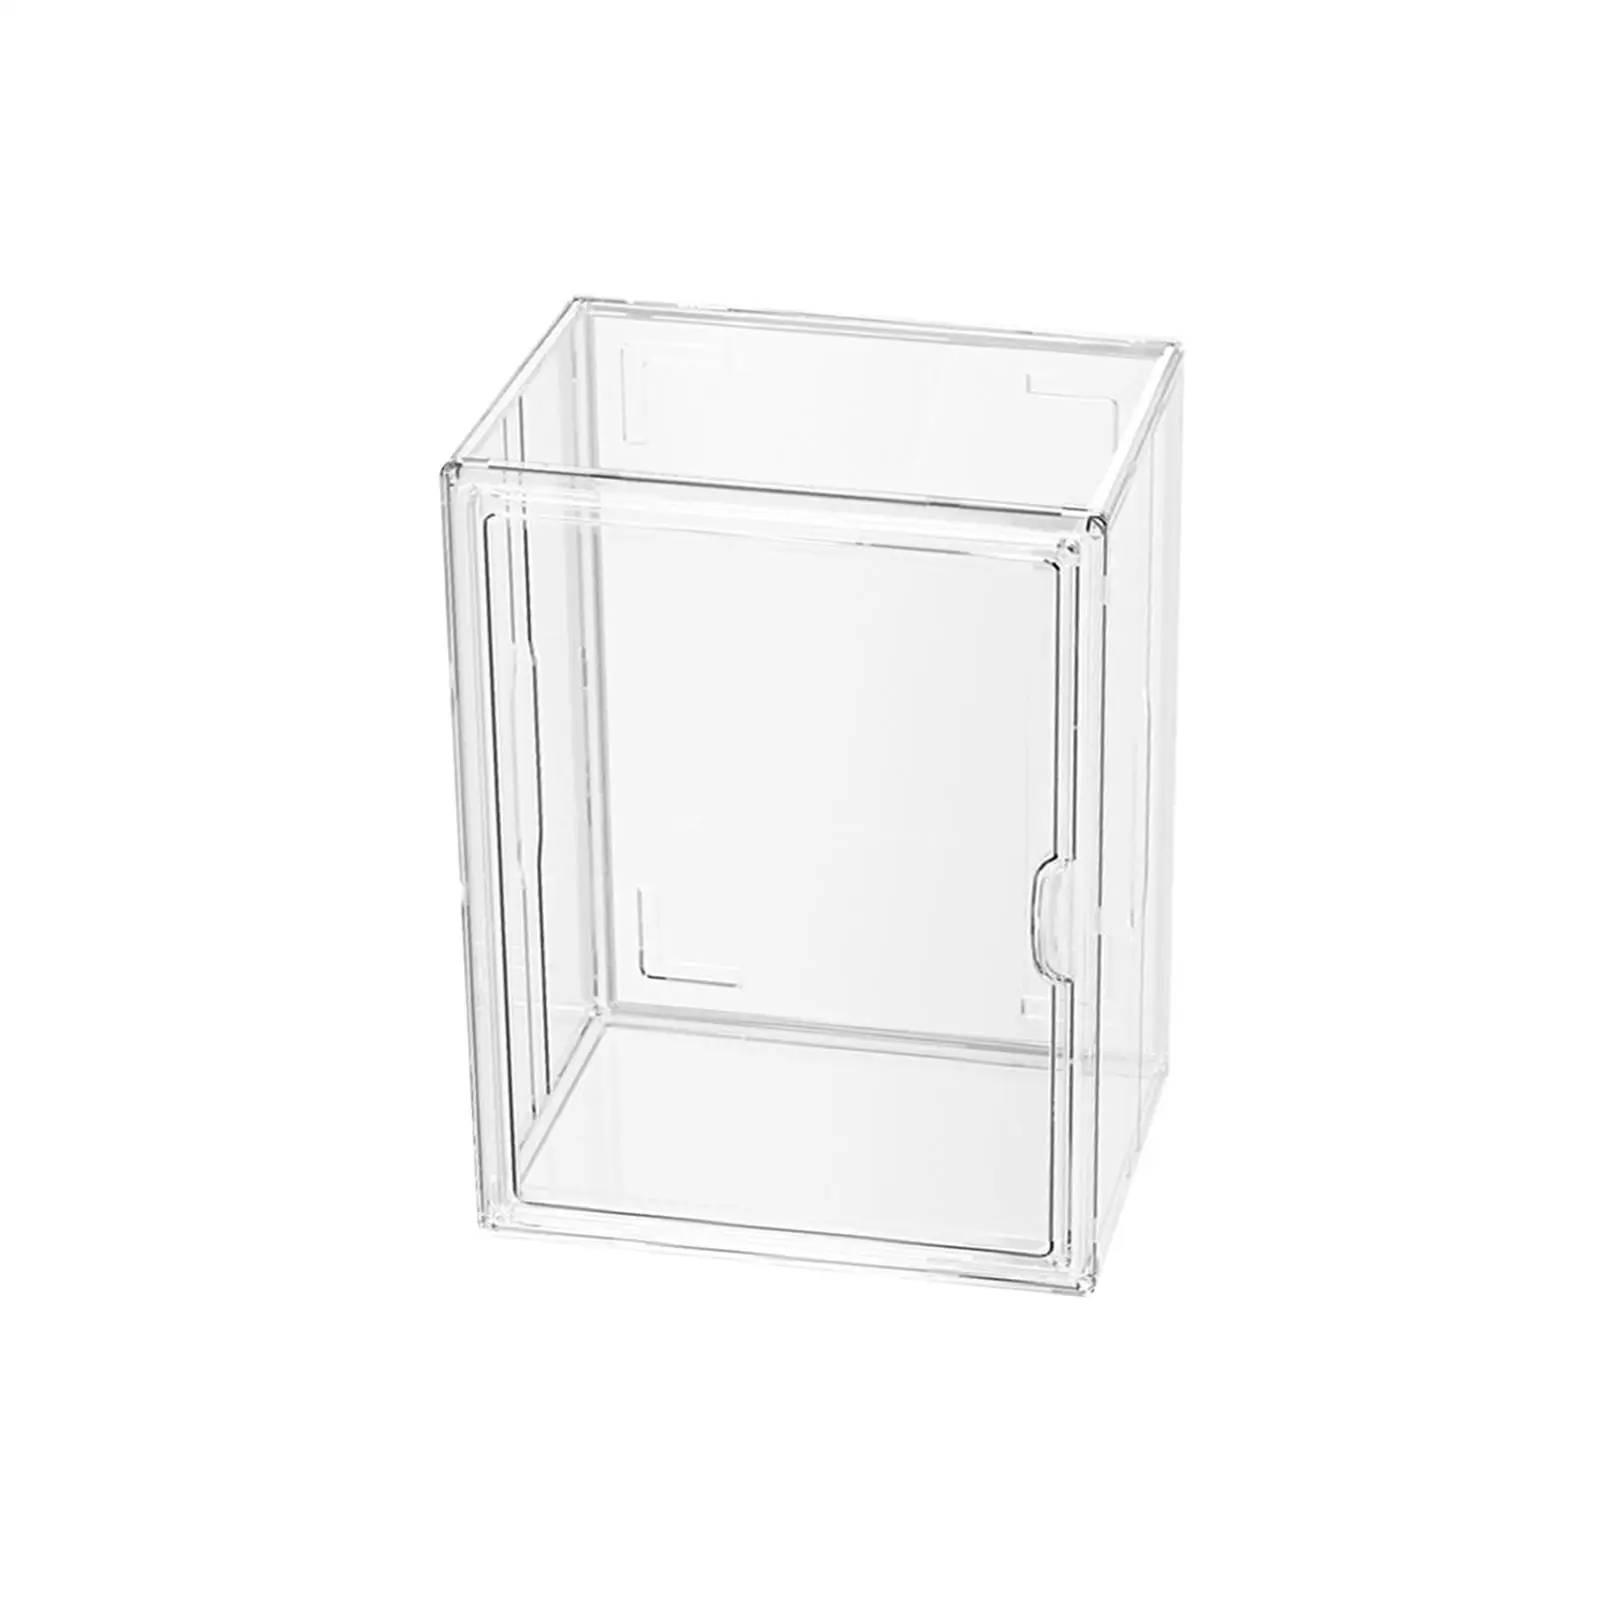 Acrylic Display Case Dustproof Countertop Display Rack Versatile Stand Protection Shelf Display Box for Action Figure Toys